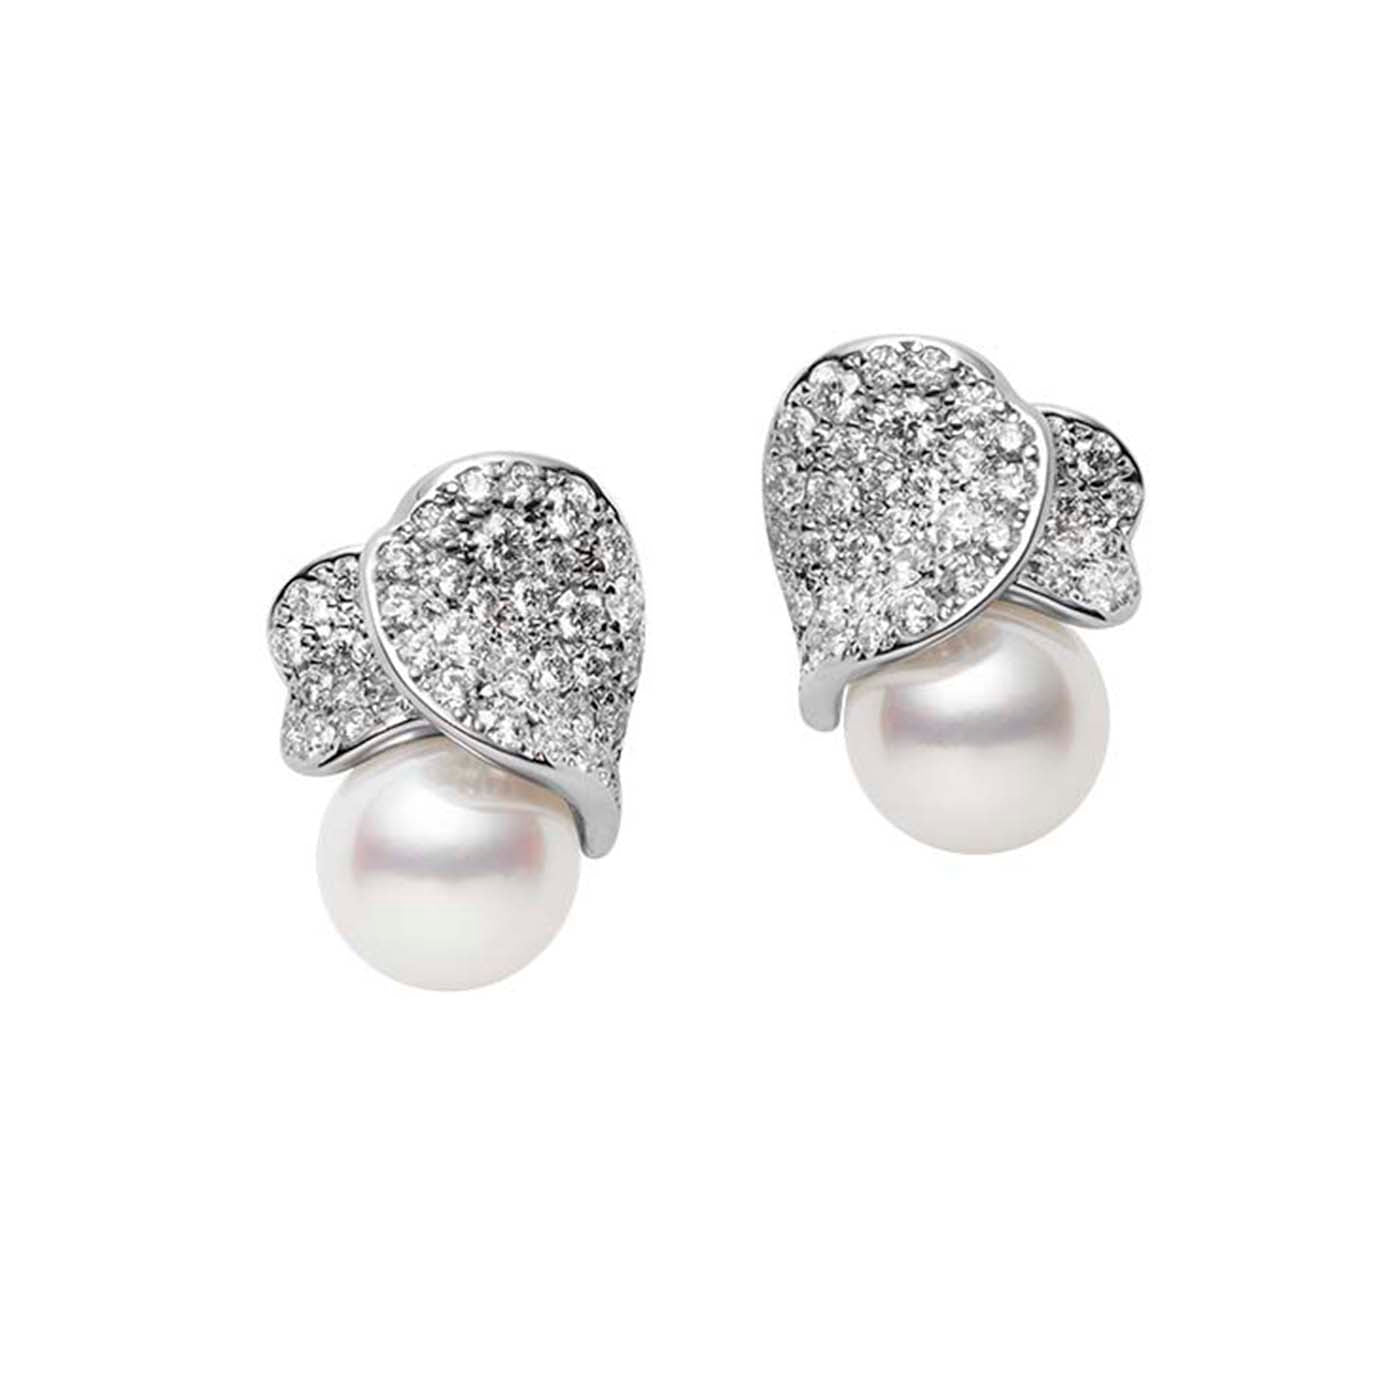 White Gold Diamond and Pearl Earrings